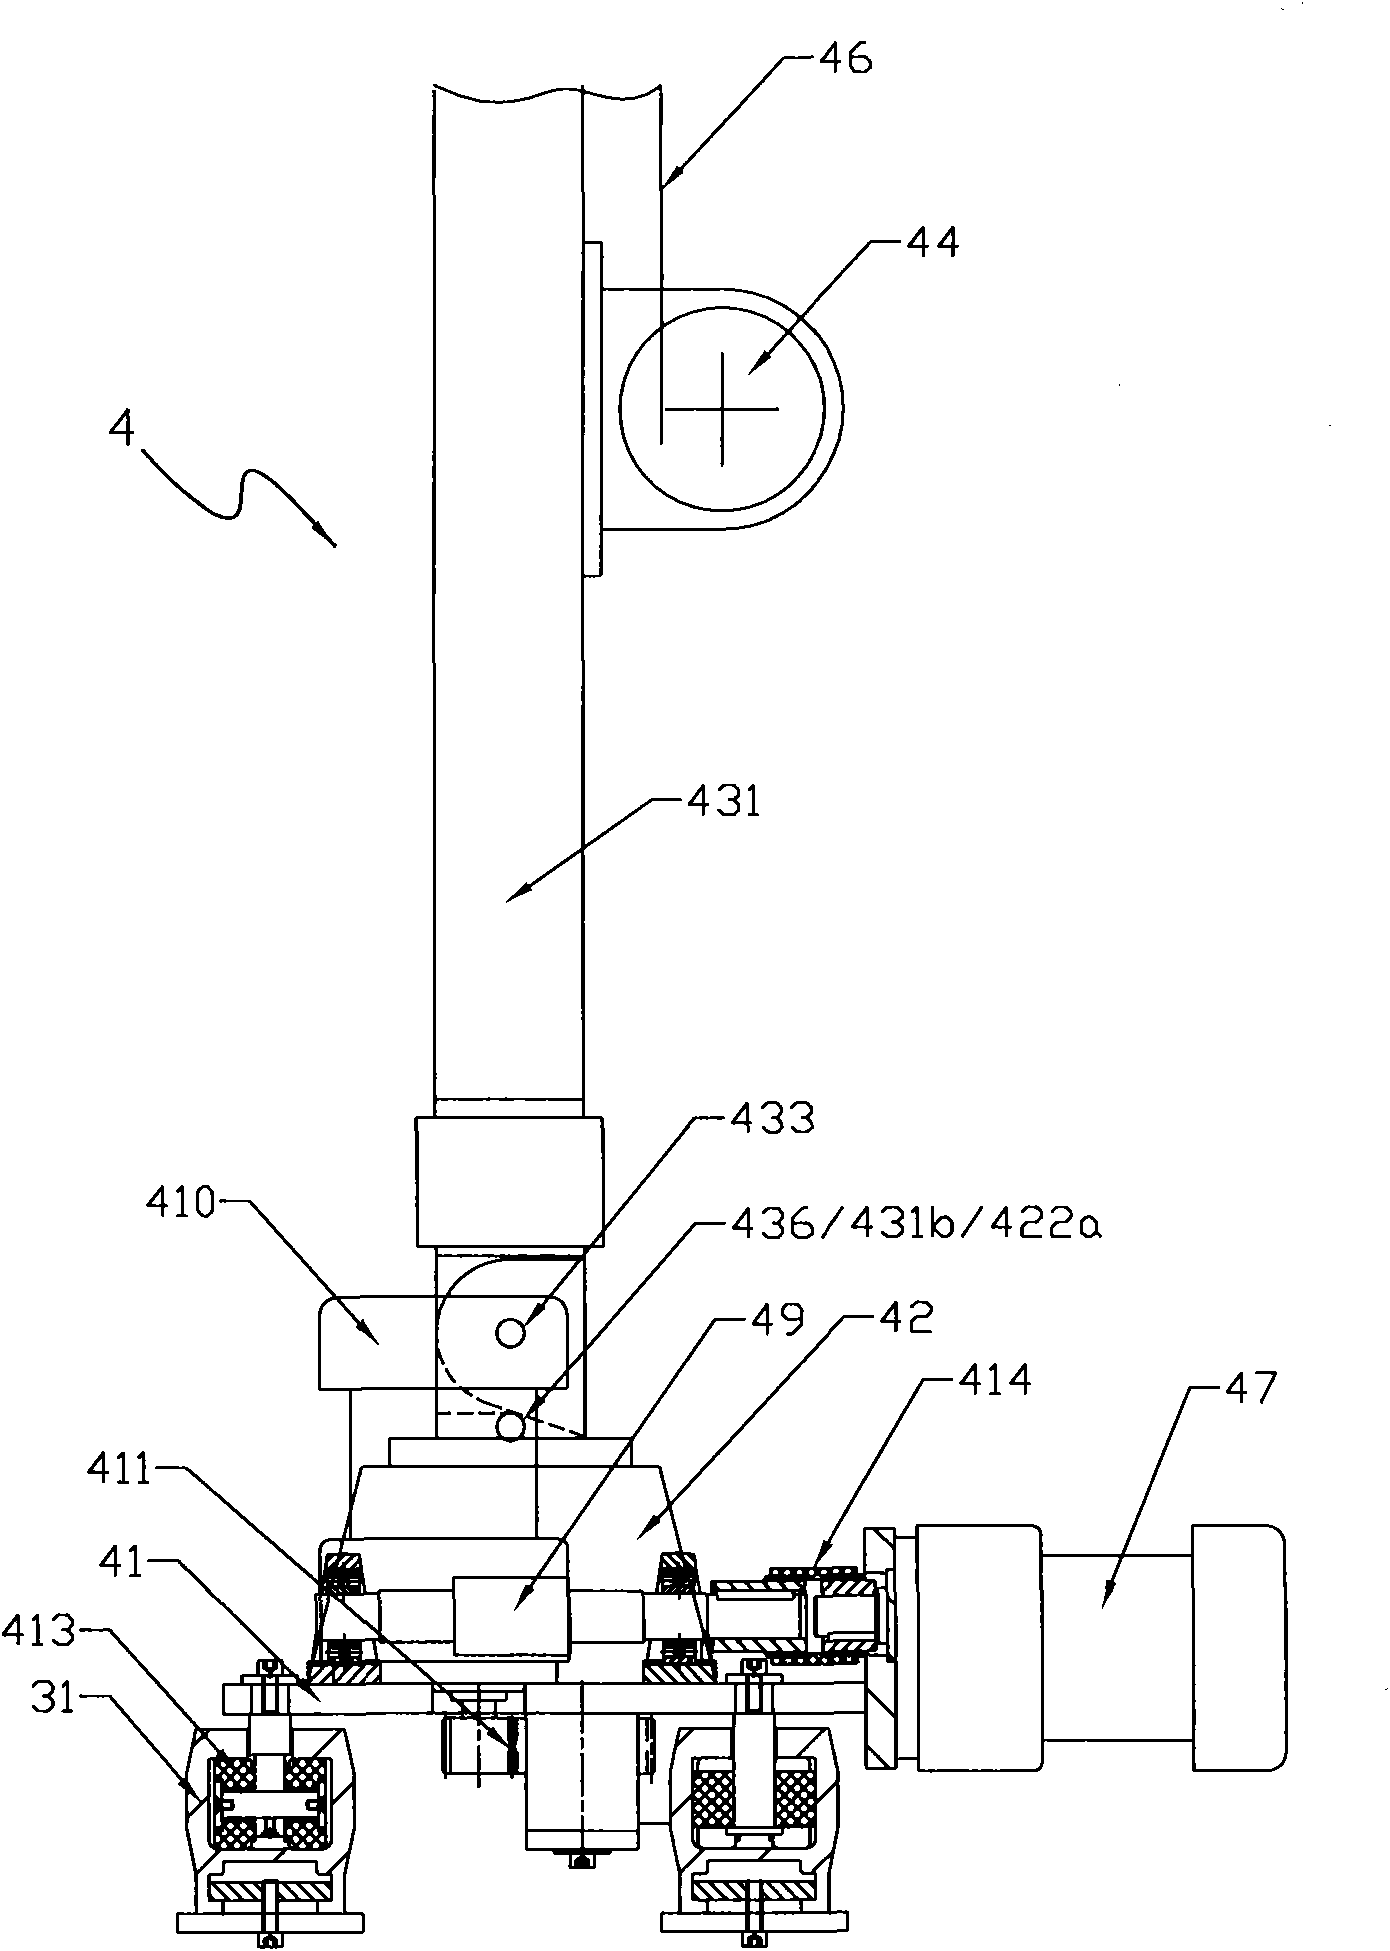 Lifting working platform with lifting device